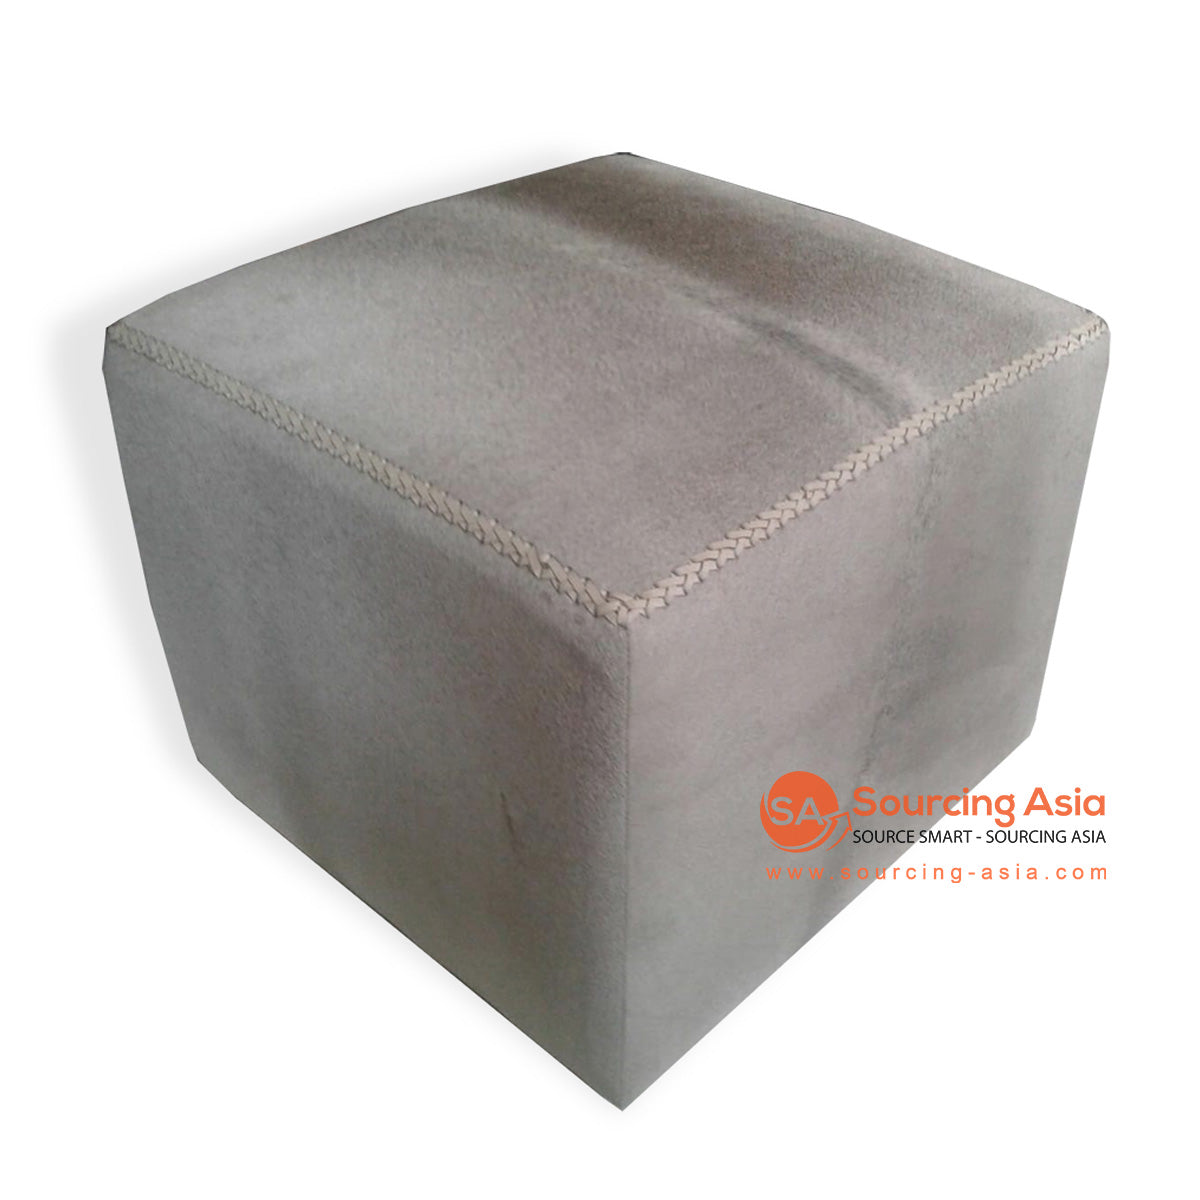 KUSJ004-2 GREY COWHIDE LEATHER SQUARE OTTOMAN